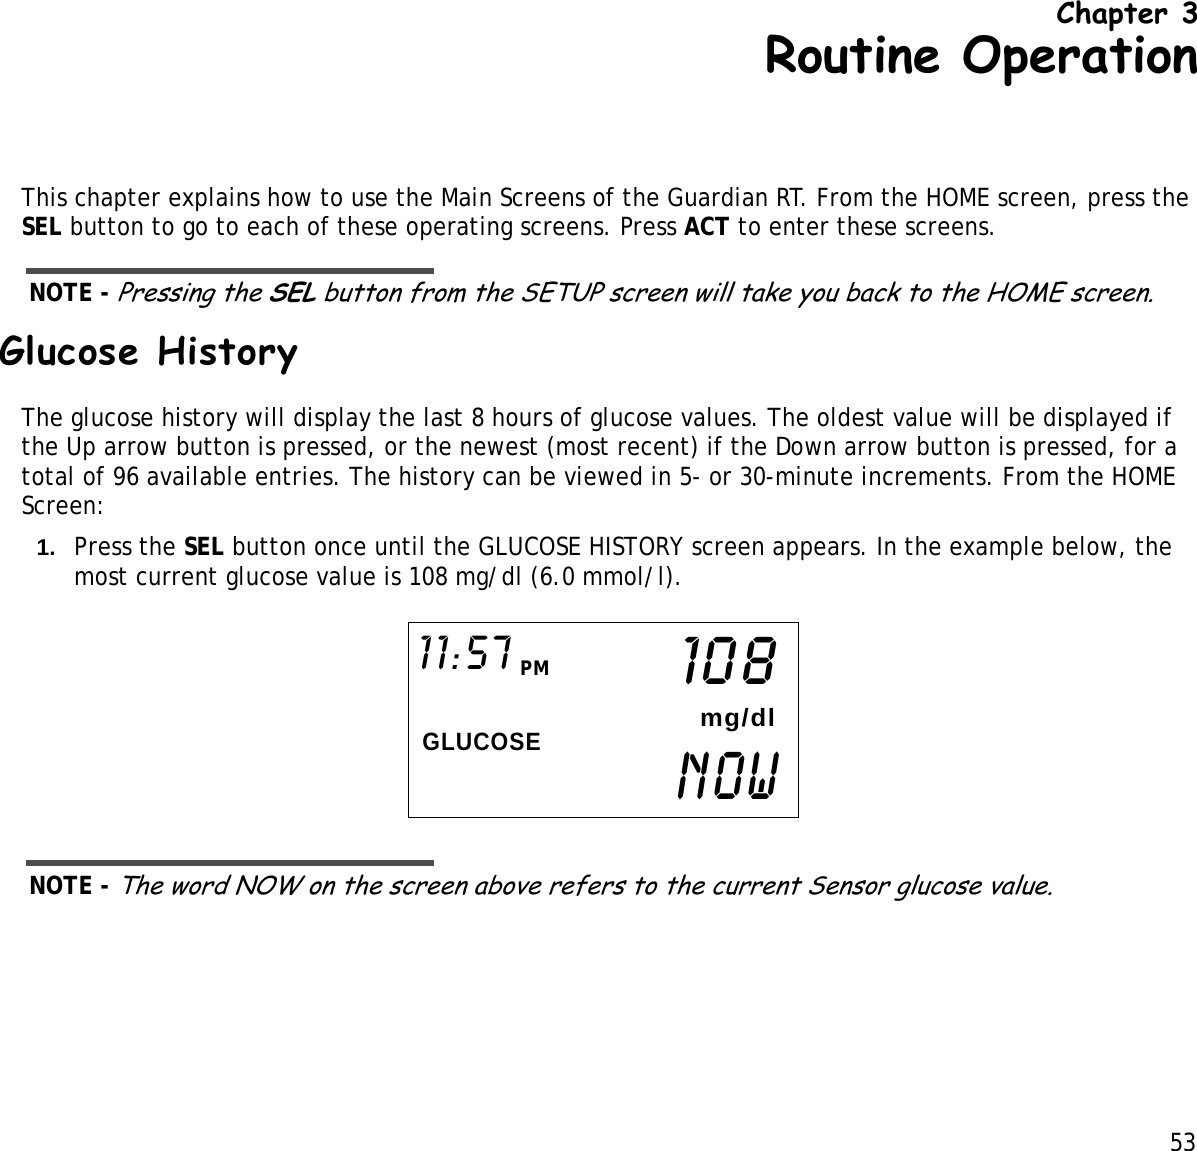 53 Chapter 3Routine OperationThis chapter explains how to use the Main Screens of the Guardian RT. From the HOME screen, press the SEL button to go to each of these operating screens. Press ACT to enter these screens. NOTE - Pressing the SEL button from the SETUP screen will take you back to the HOME screen.Glucose HistoryThe glucose history will display the last 8 hours of glucose values. The oldest value will be displayed if the Up arrow button is pressed, or the newest (most recent) if the Down arrow button is pressed, for a total of 96 available entries. The history can be viewed in 5- or 30-minute increments. From the HOME Screen:1. Press the SEL button once until the GLUCOSE HISTORY screen appears. In the example below, the most current glucose value is 108 mg/dl (6.0 mmol/l). NOTE - The word NOW on the screen above refers to the current Sensor glucose value.NOWGLUCOSE11:57 PM108mg/dl